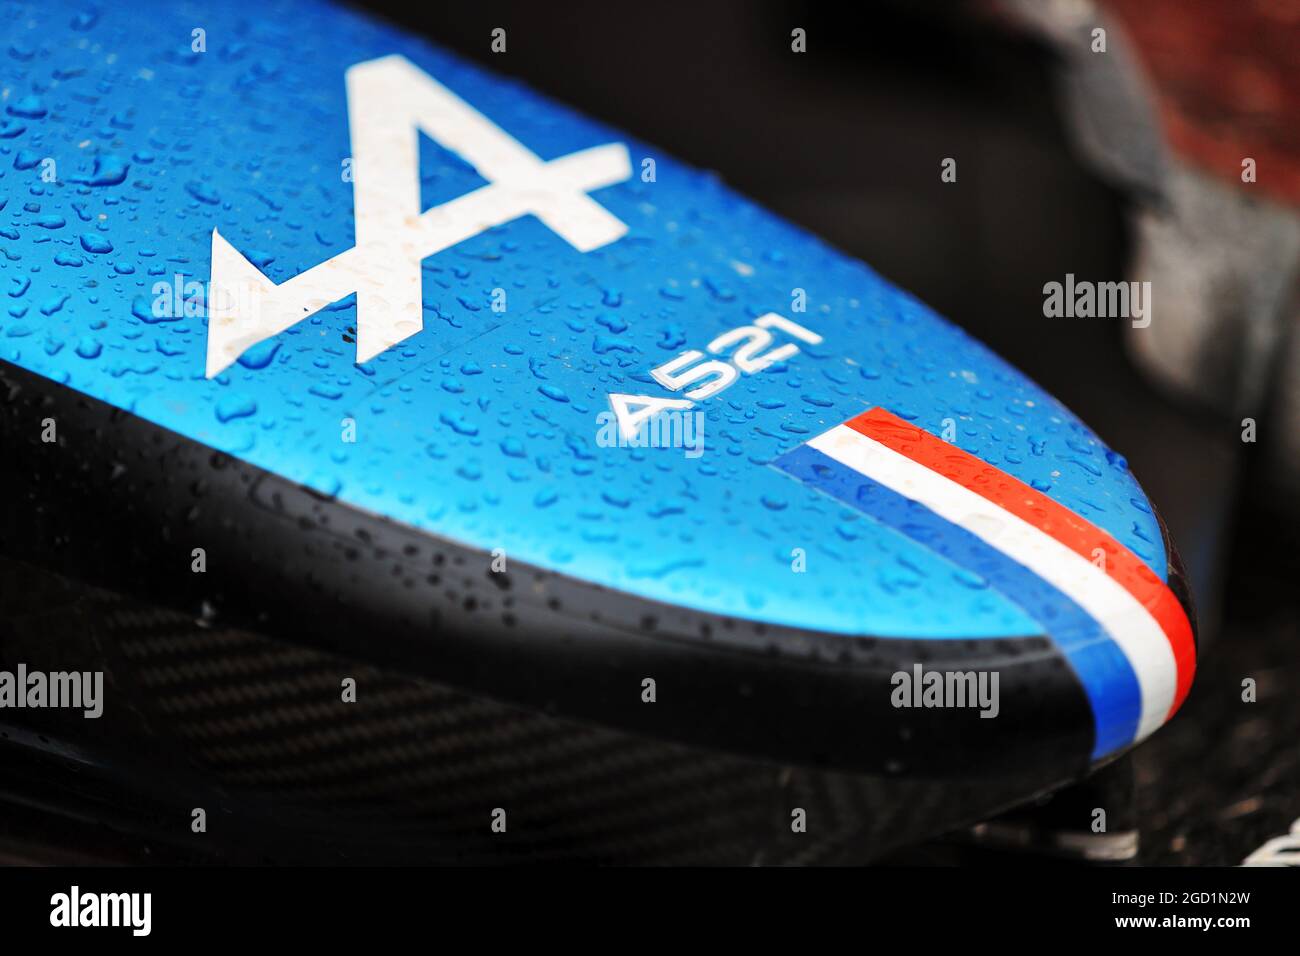 Alpine F1 Team A521 nosecone. French Grand Prix, Sunday 20th June 2021. Paul Ricard, France. Stock Photo